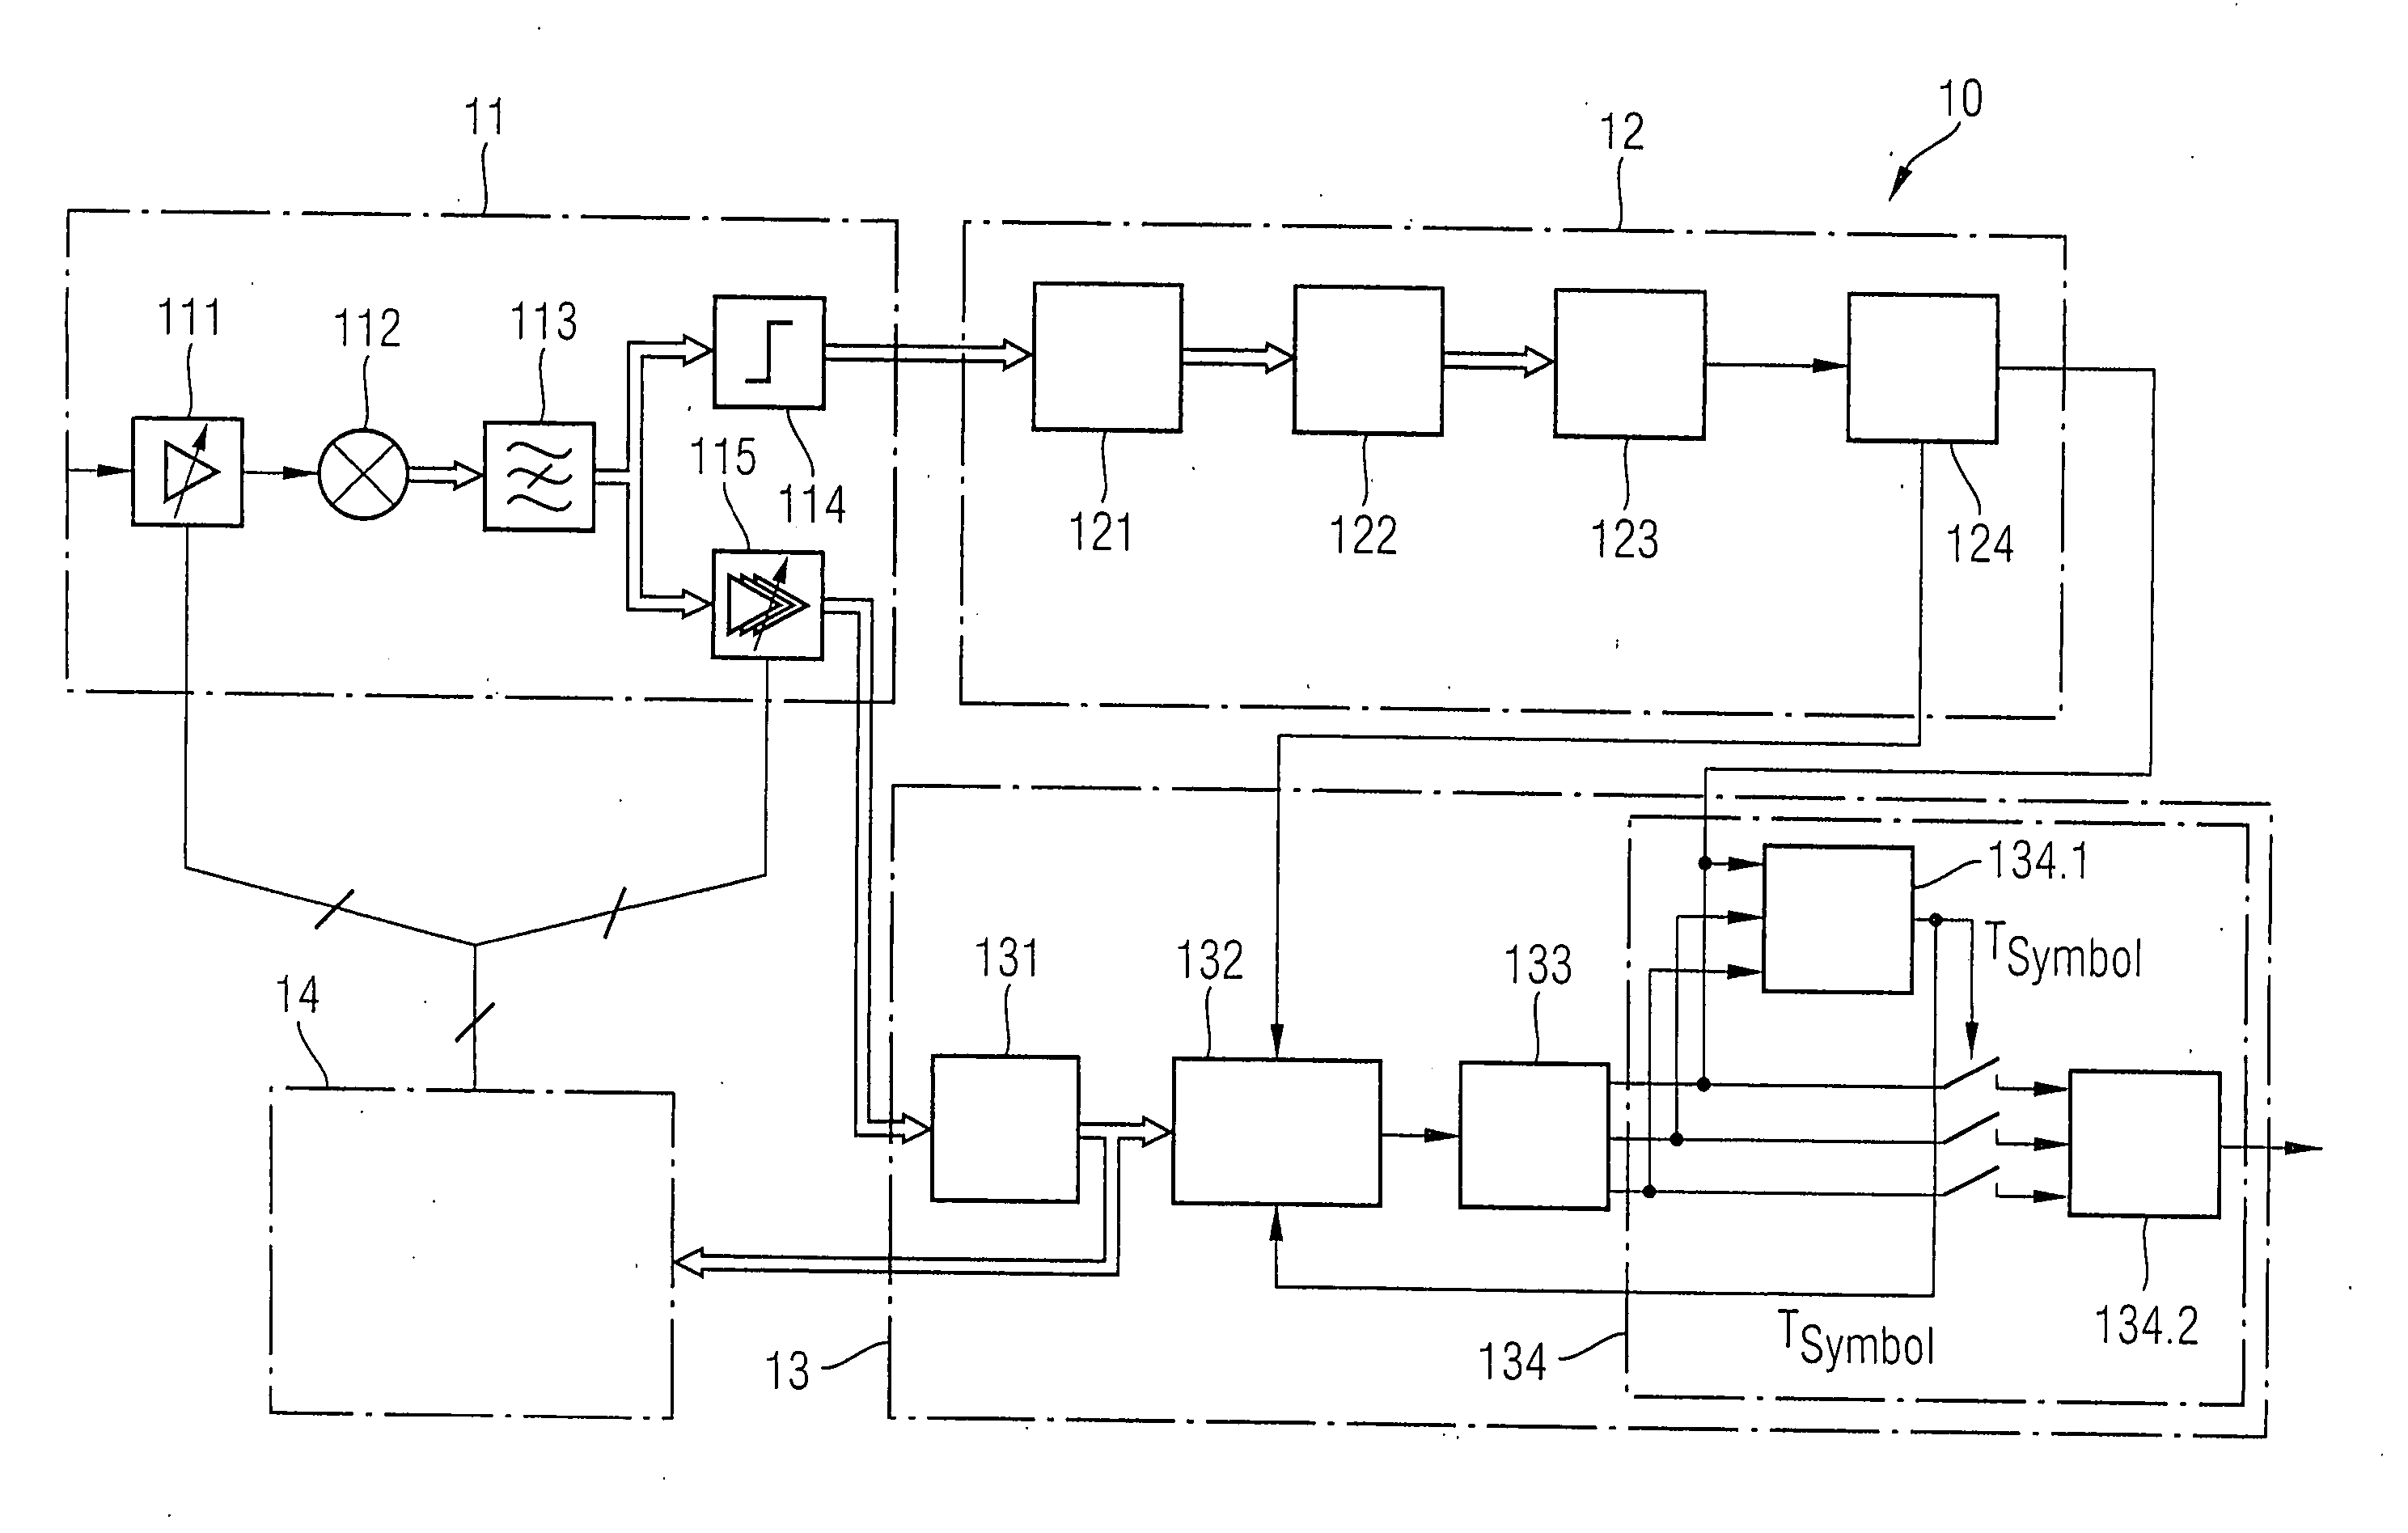 Radio receiver for the reception of data bursts which are modulated with two modulation types